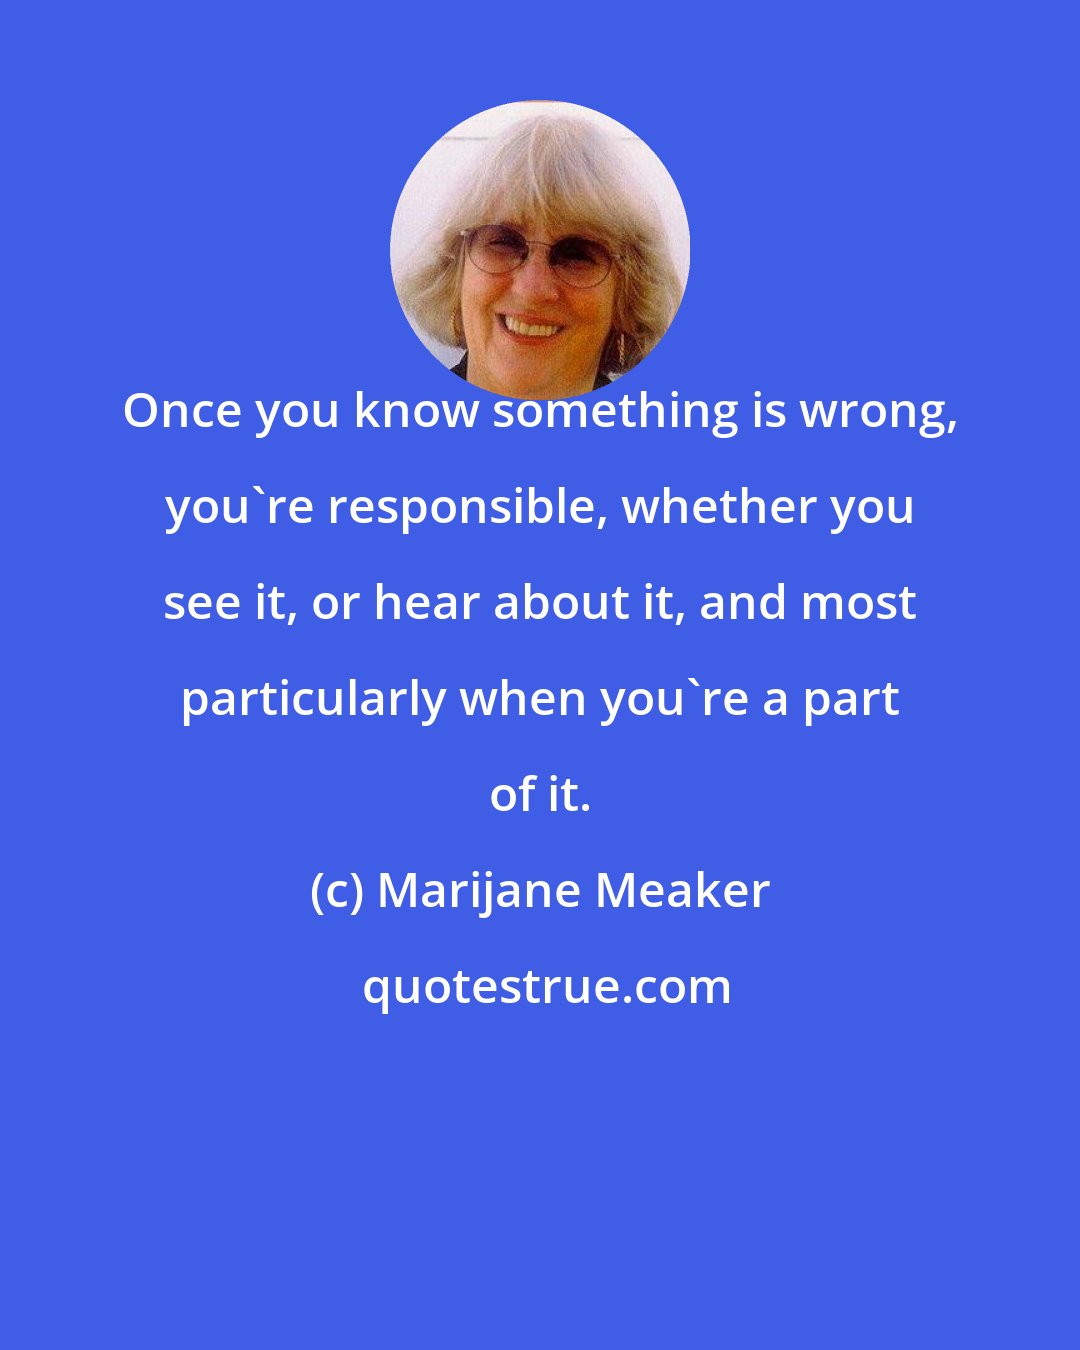 Marijane Meaker: Once you know something is wrong, you're responsible, whether you see it, or hear about it, and most particularly when you're a part of it.